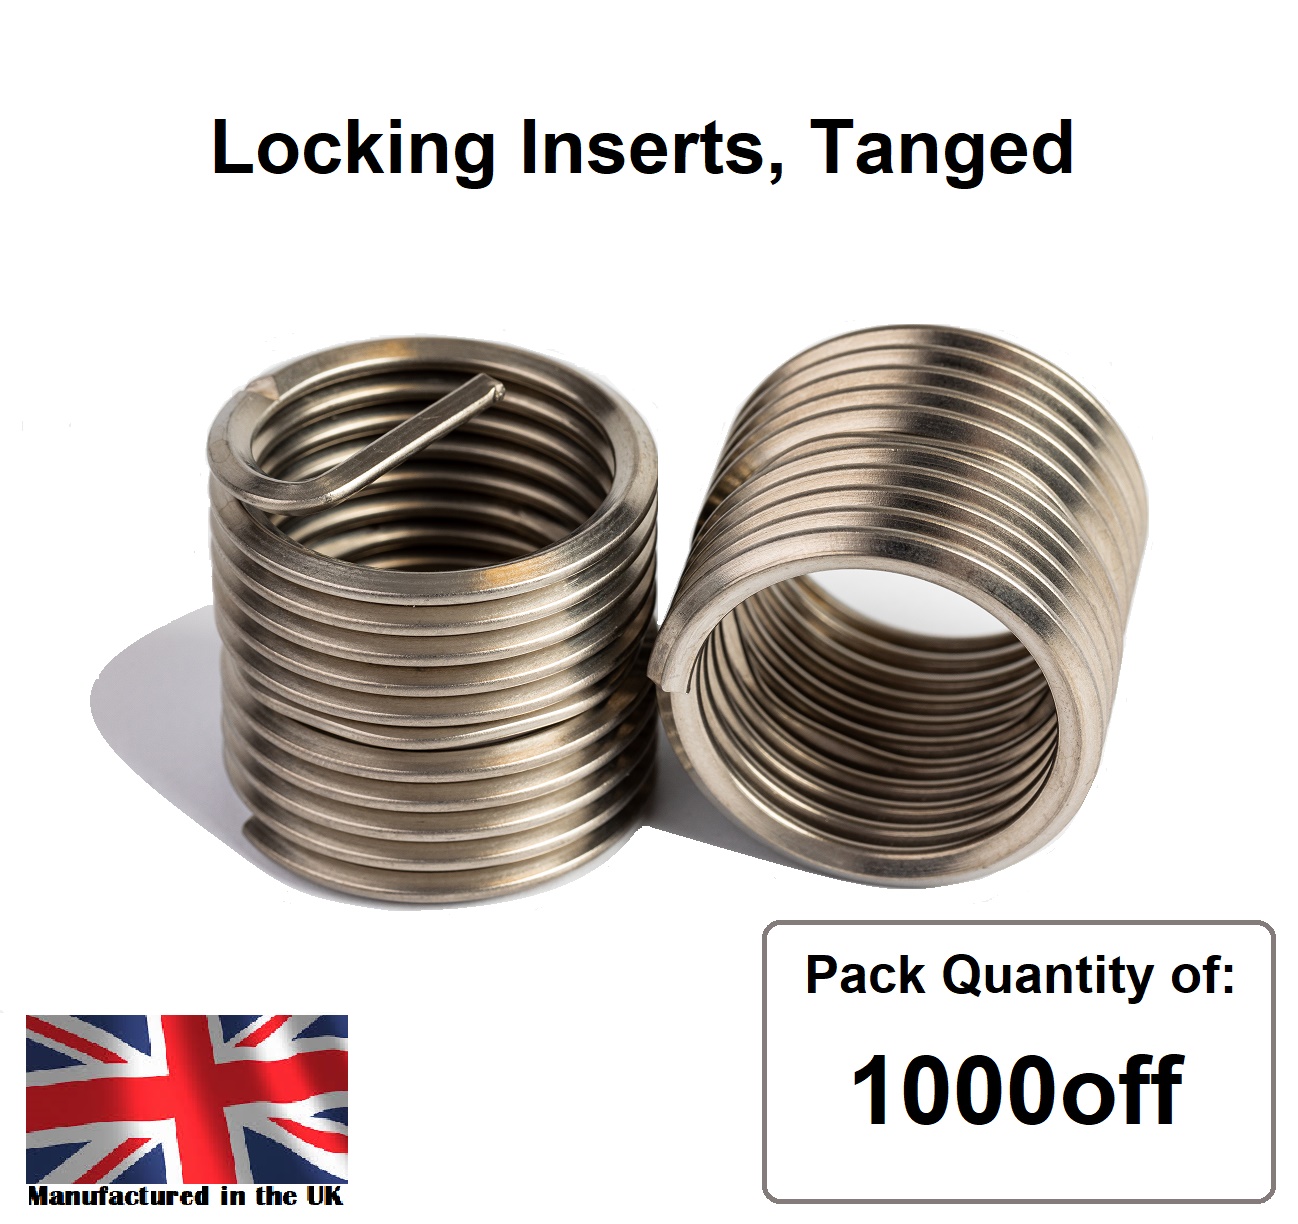 M14 x 2.0 x 3D Metric Coarse, LOCKING, Tanged, Wire Thread Repair Insert, 304/A2 Stainless (Pack 1000)